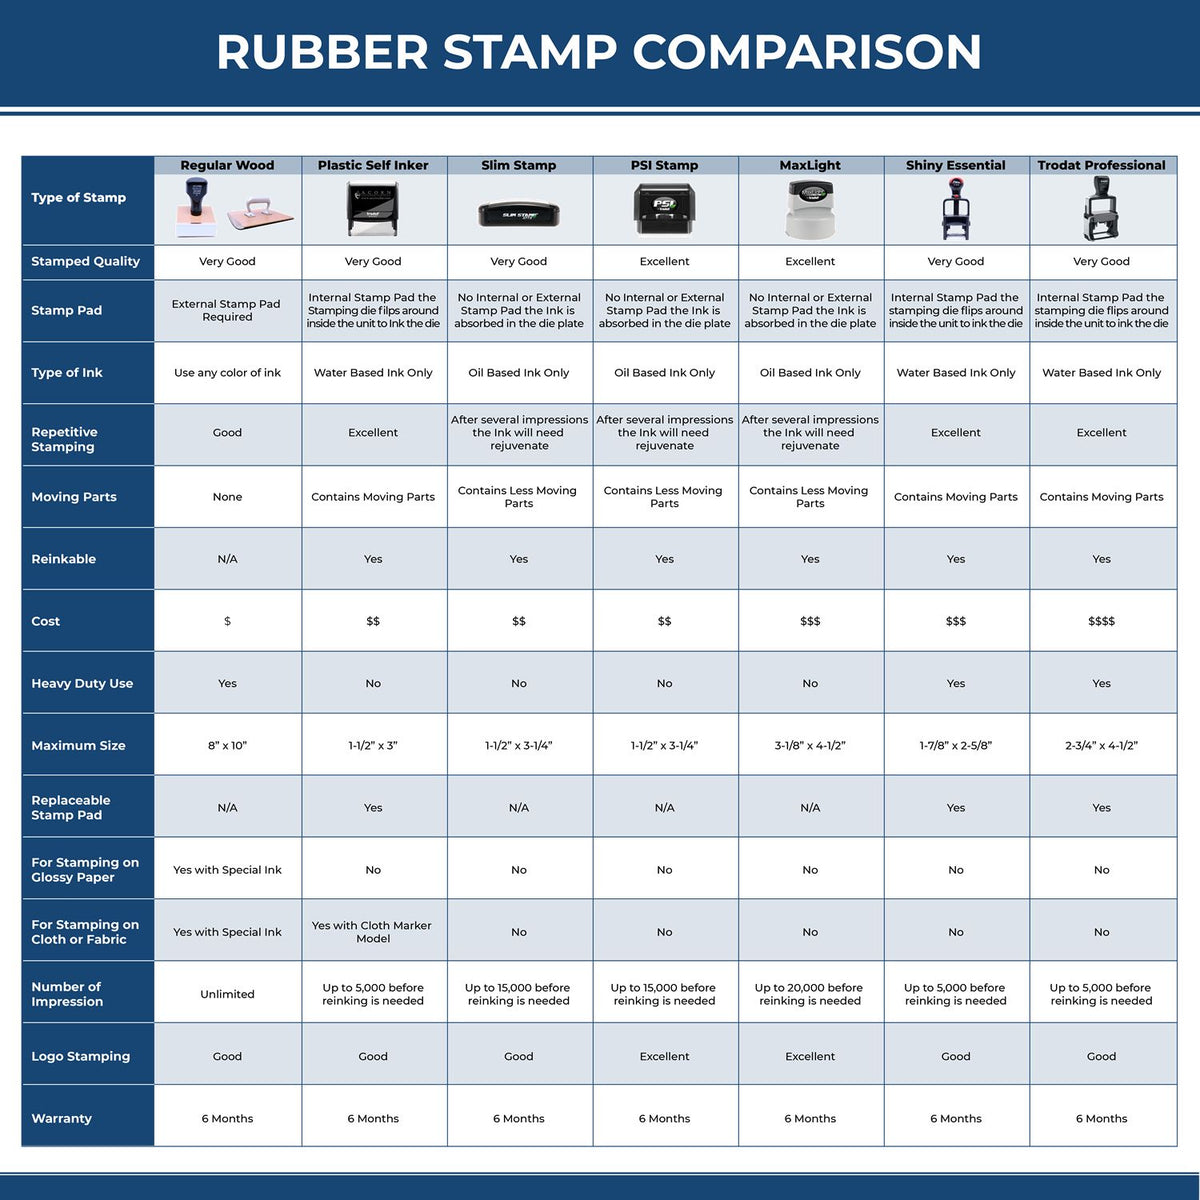 A comparison chart for the different types of mount models available for the Wooden Handle Virginia State Seal Notary Public Stamp.